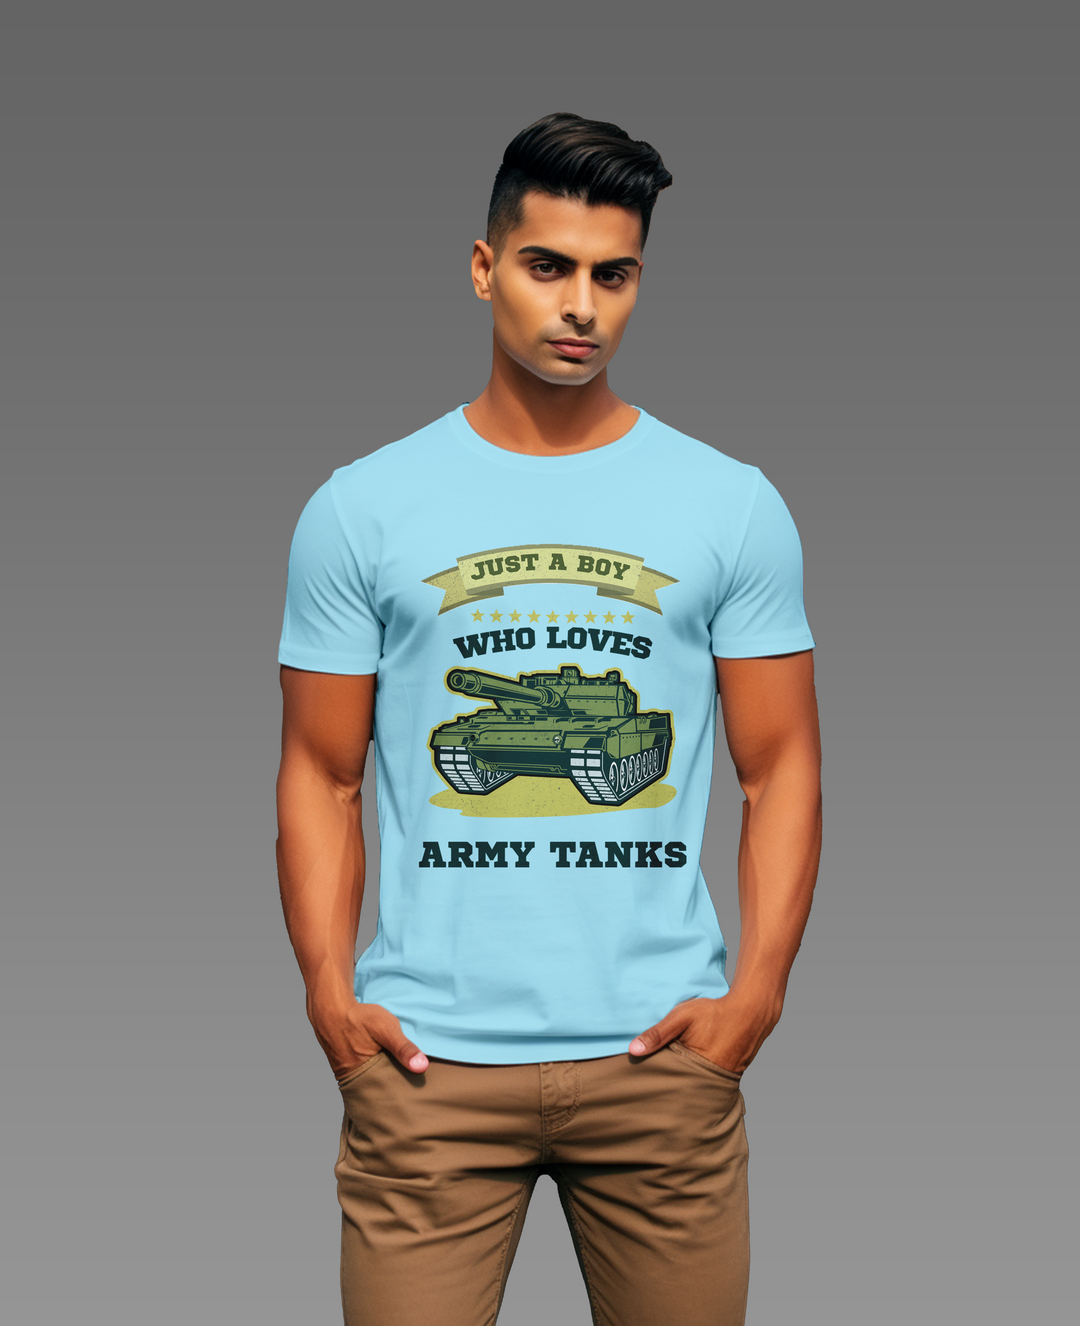 Men's Just a boy who loves Army Tanks tee